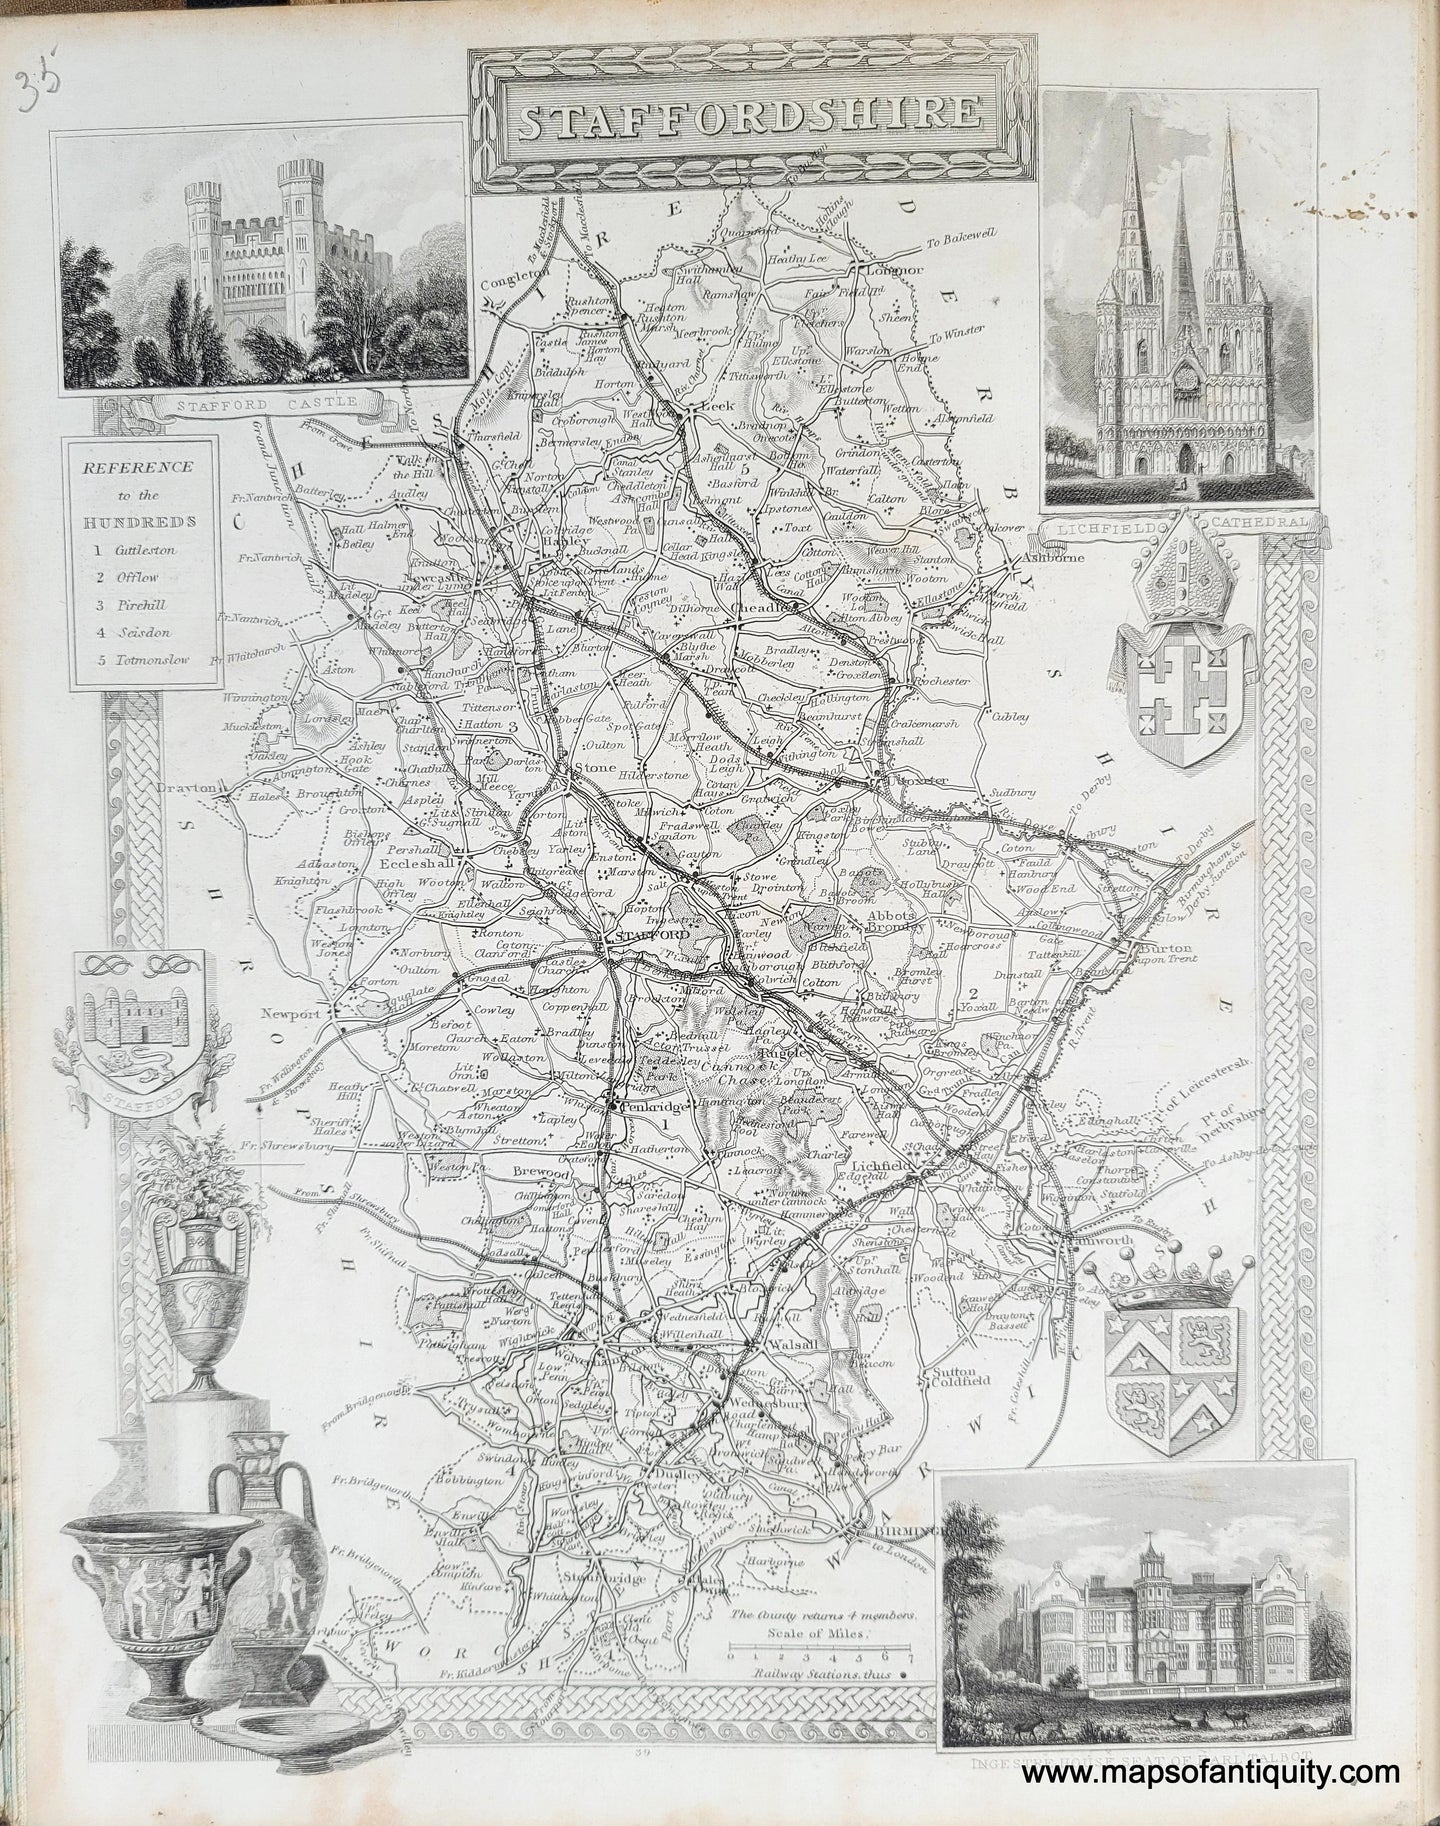 Genuine-Antique-Map-Staffordshire-1850-Virtue-Maps-Of-Antiquity